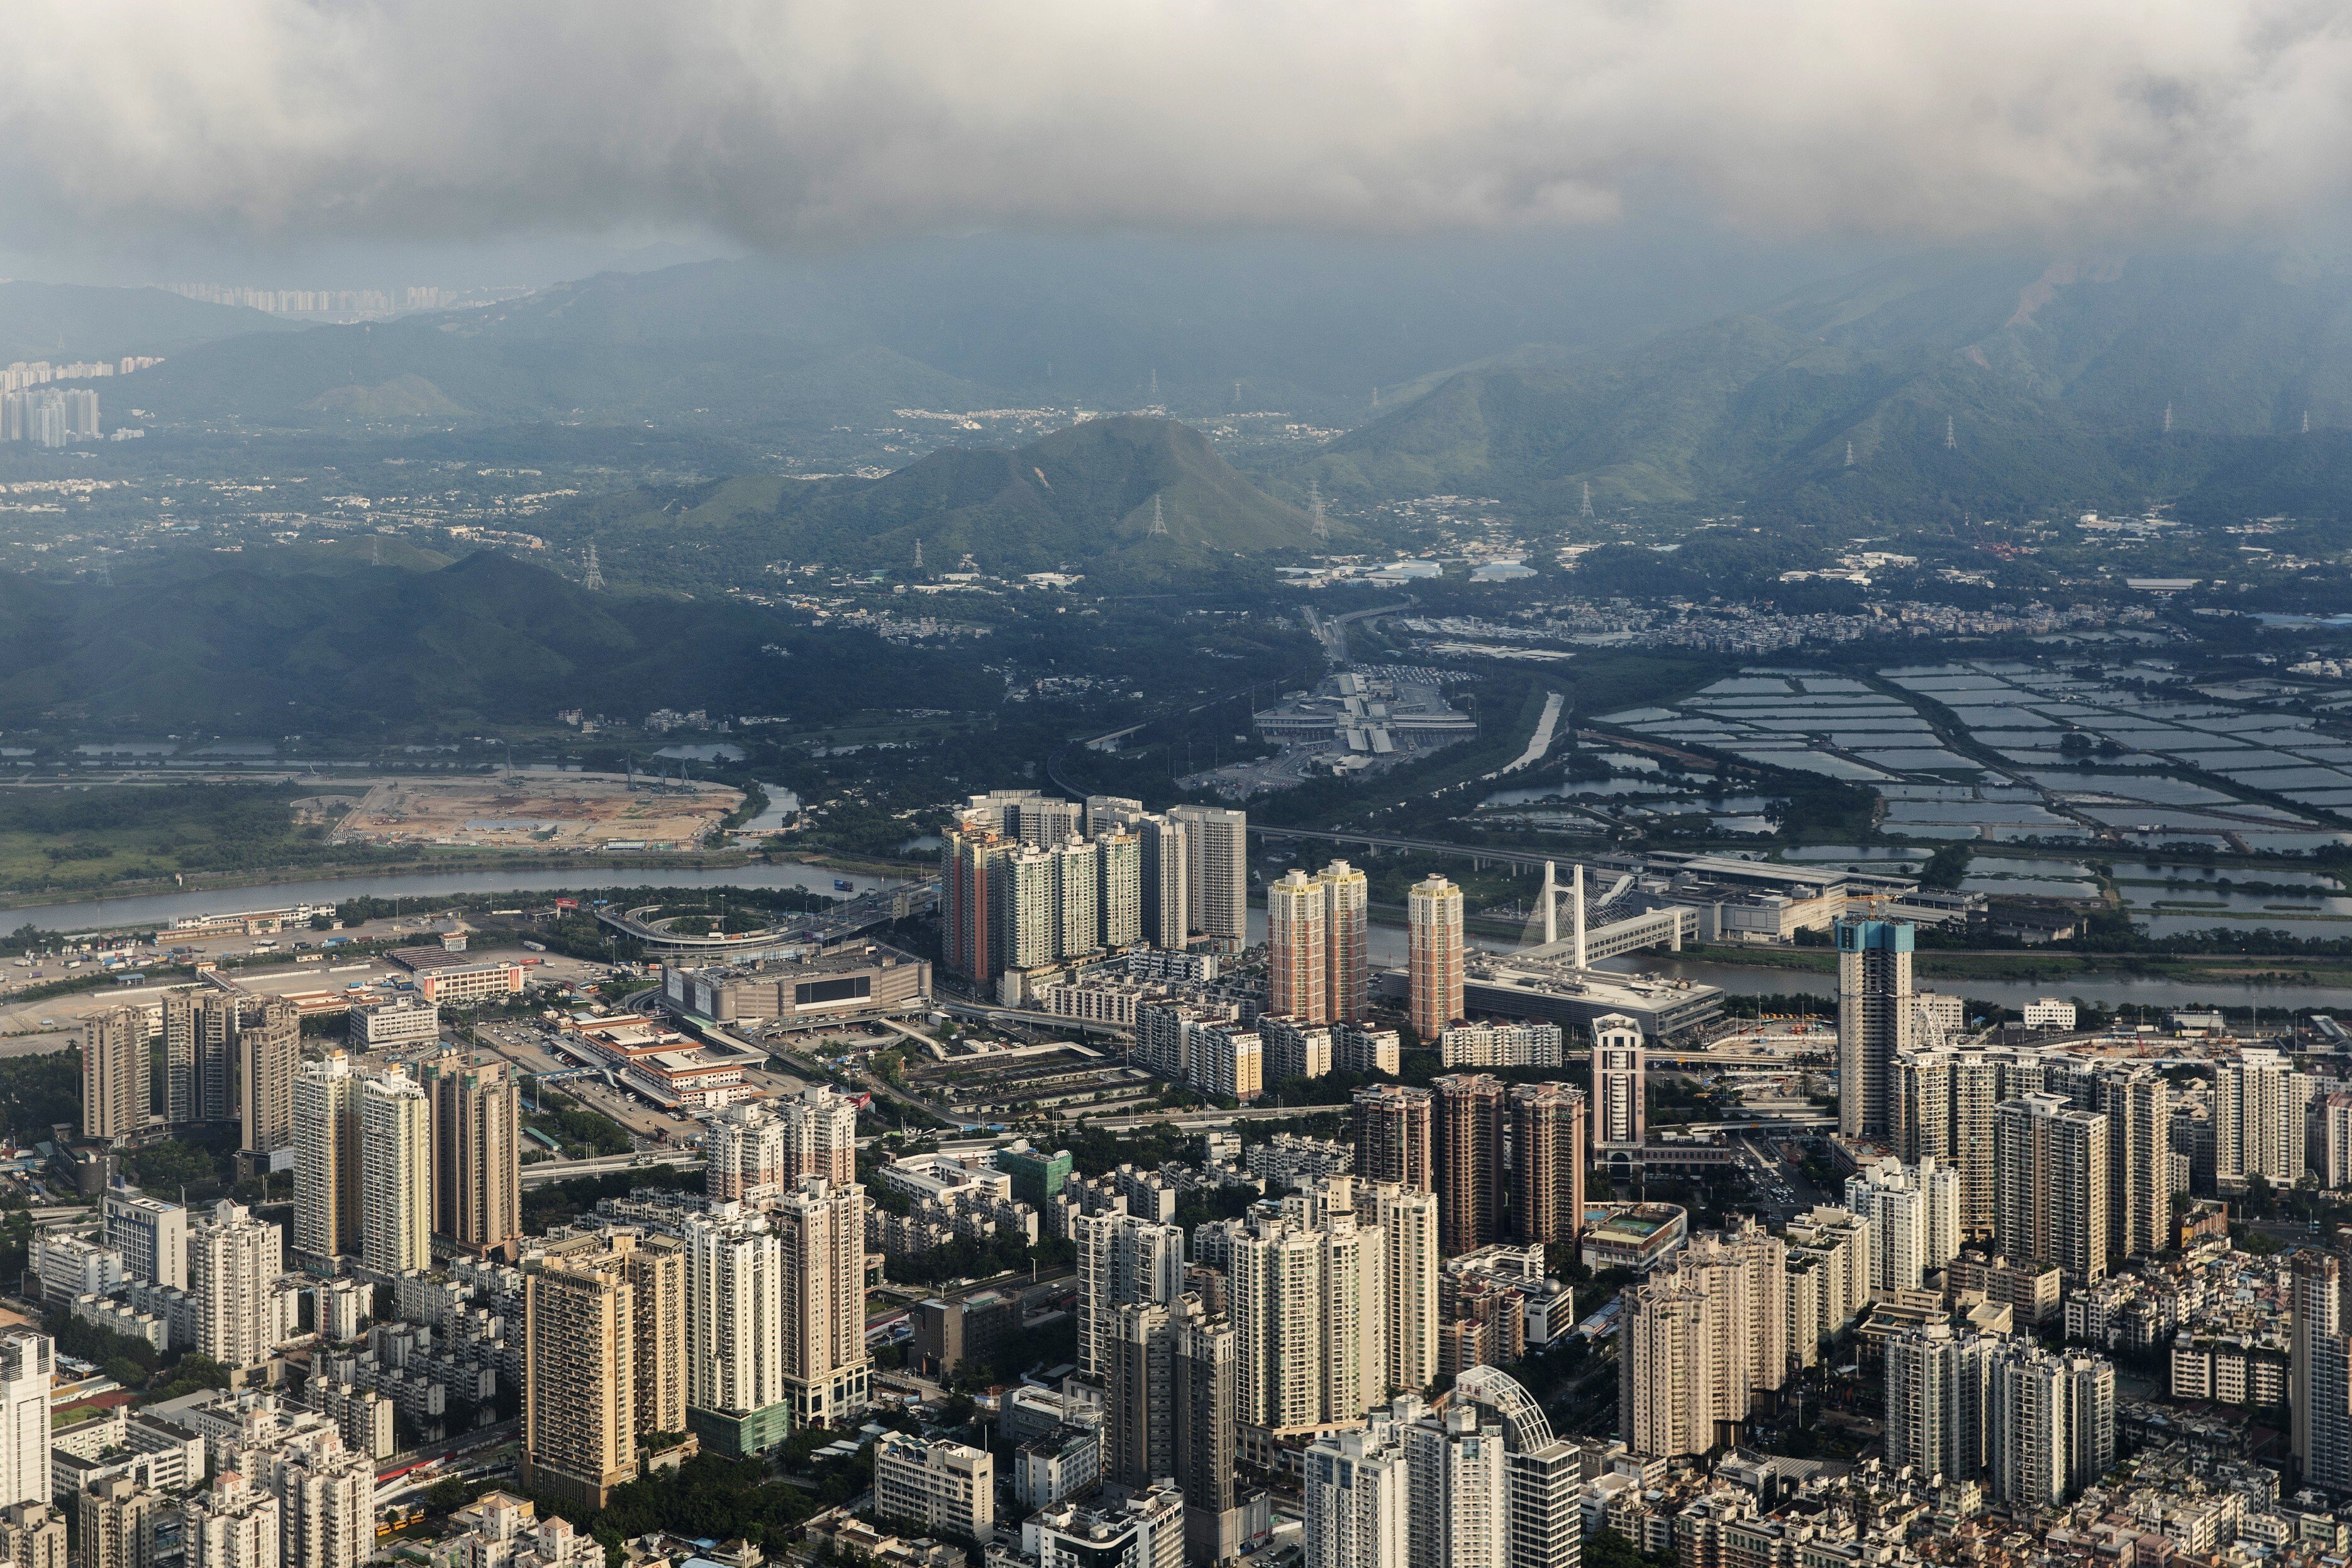 Shenzhen, Hong Kong’s neighbour to the north in the Greater Bay Area development zone. More Hongkongers are expected to work and live in the region. Photo: Bloomberg